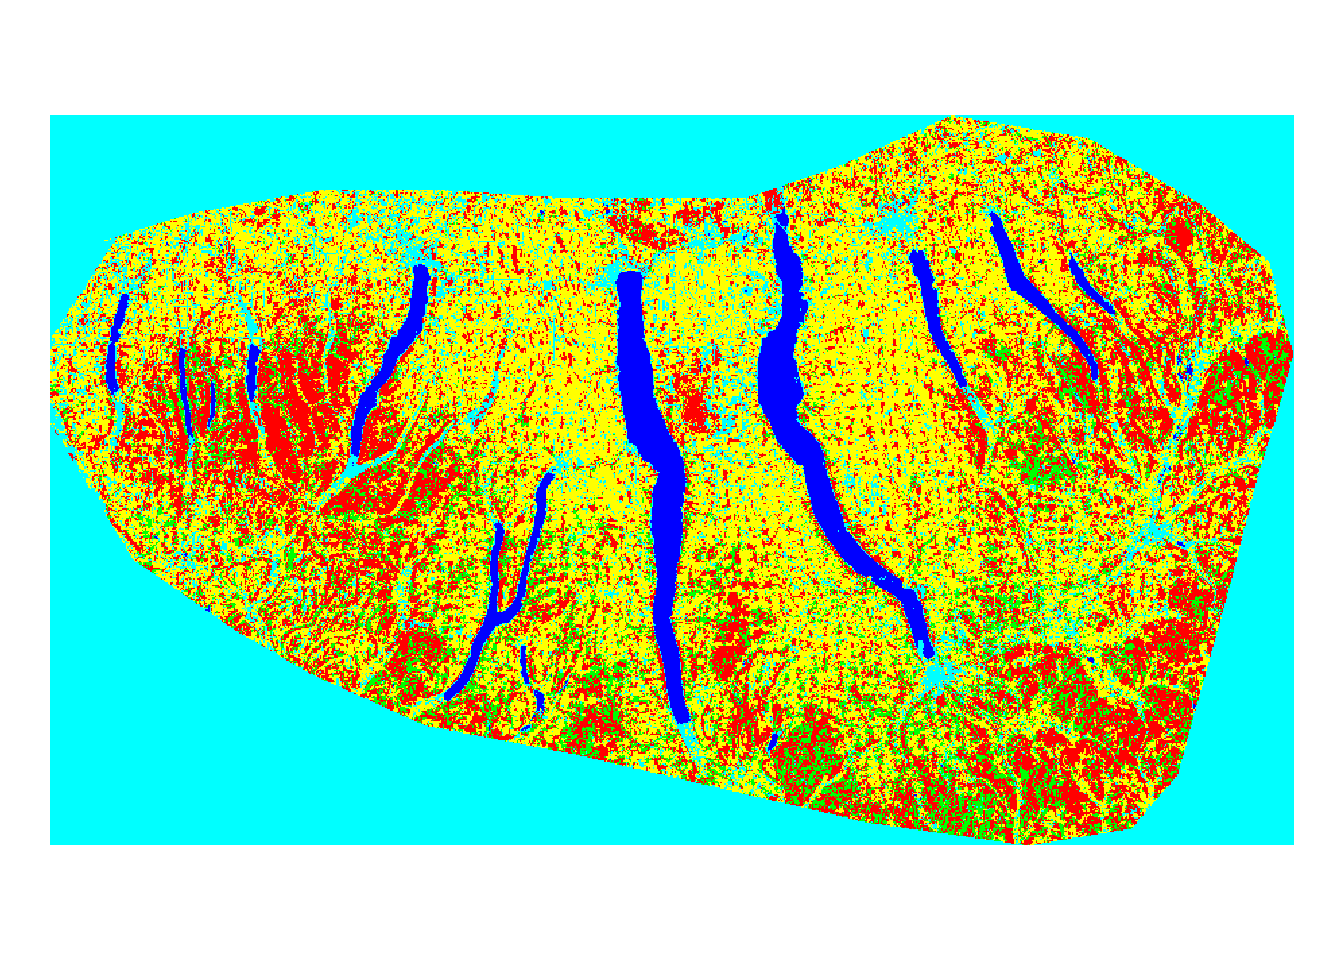 Land Use Classification derived from a Landsat 8 OLI Image from April 23, 2017